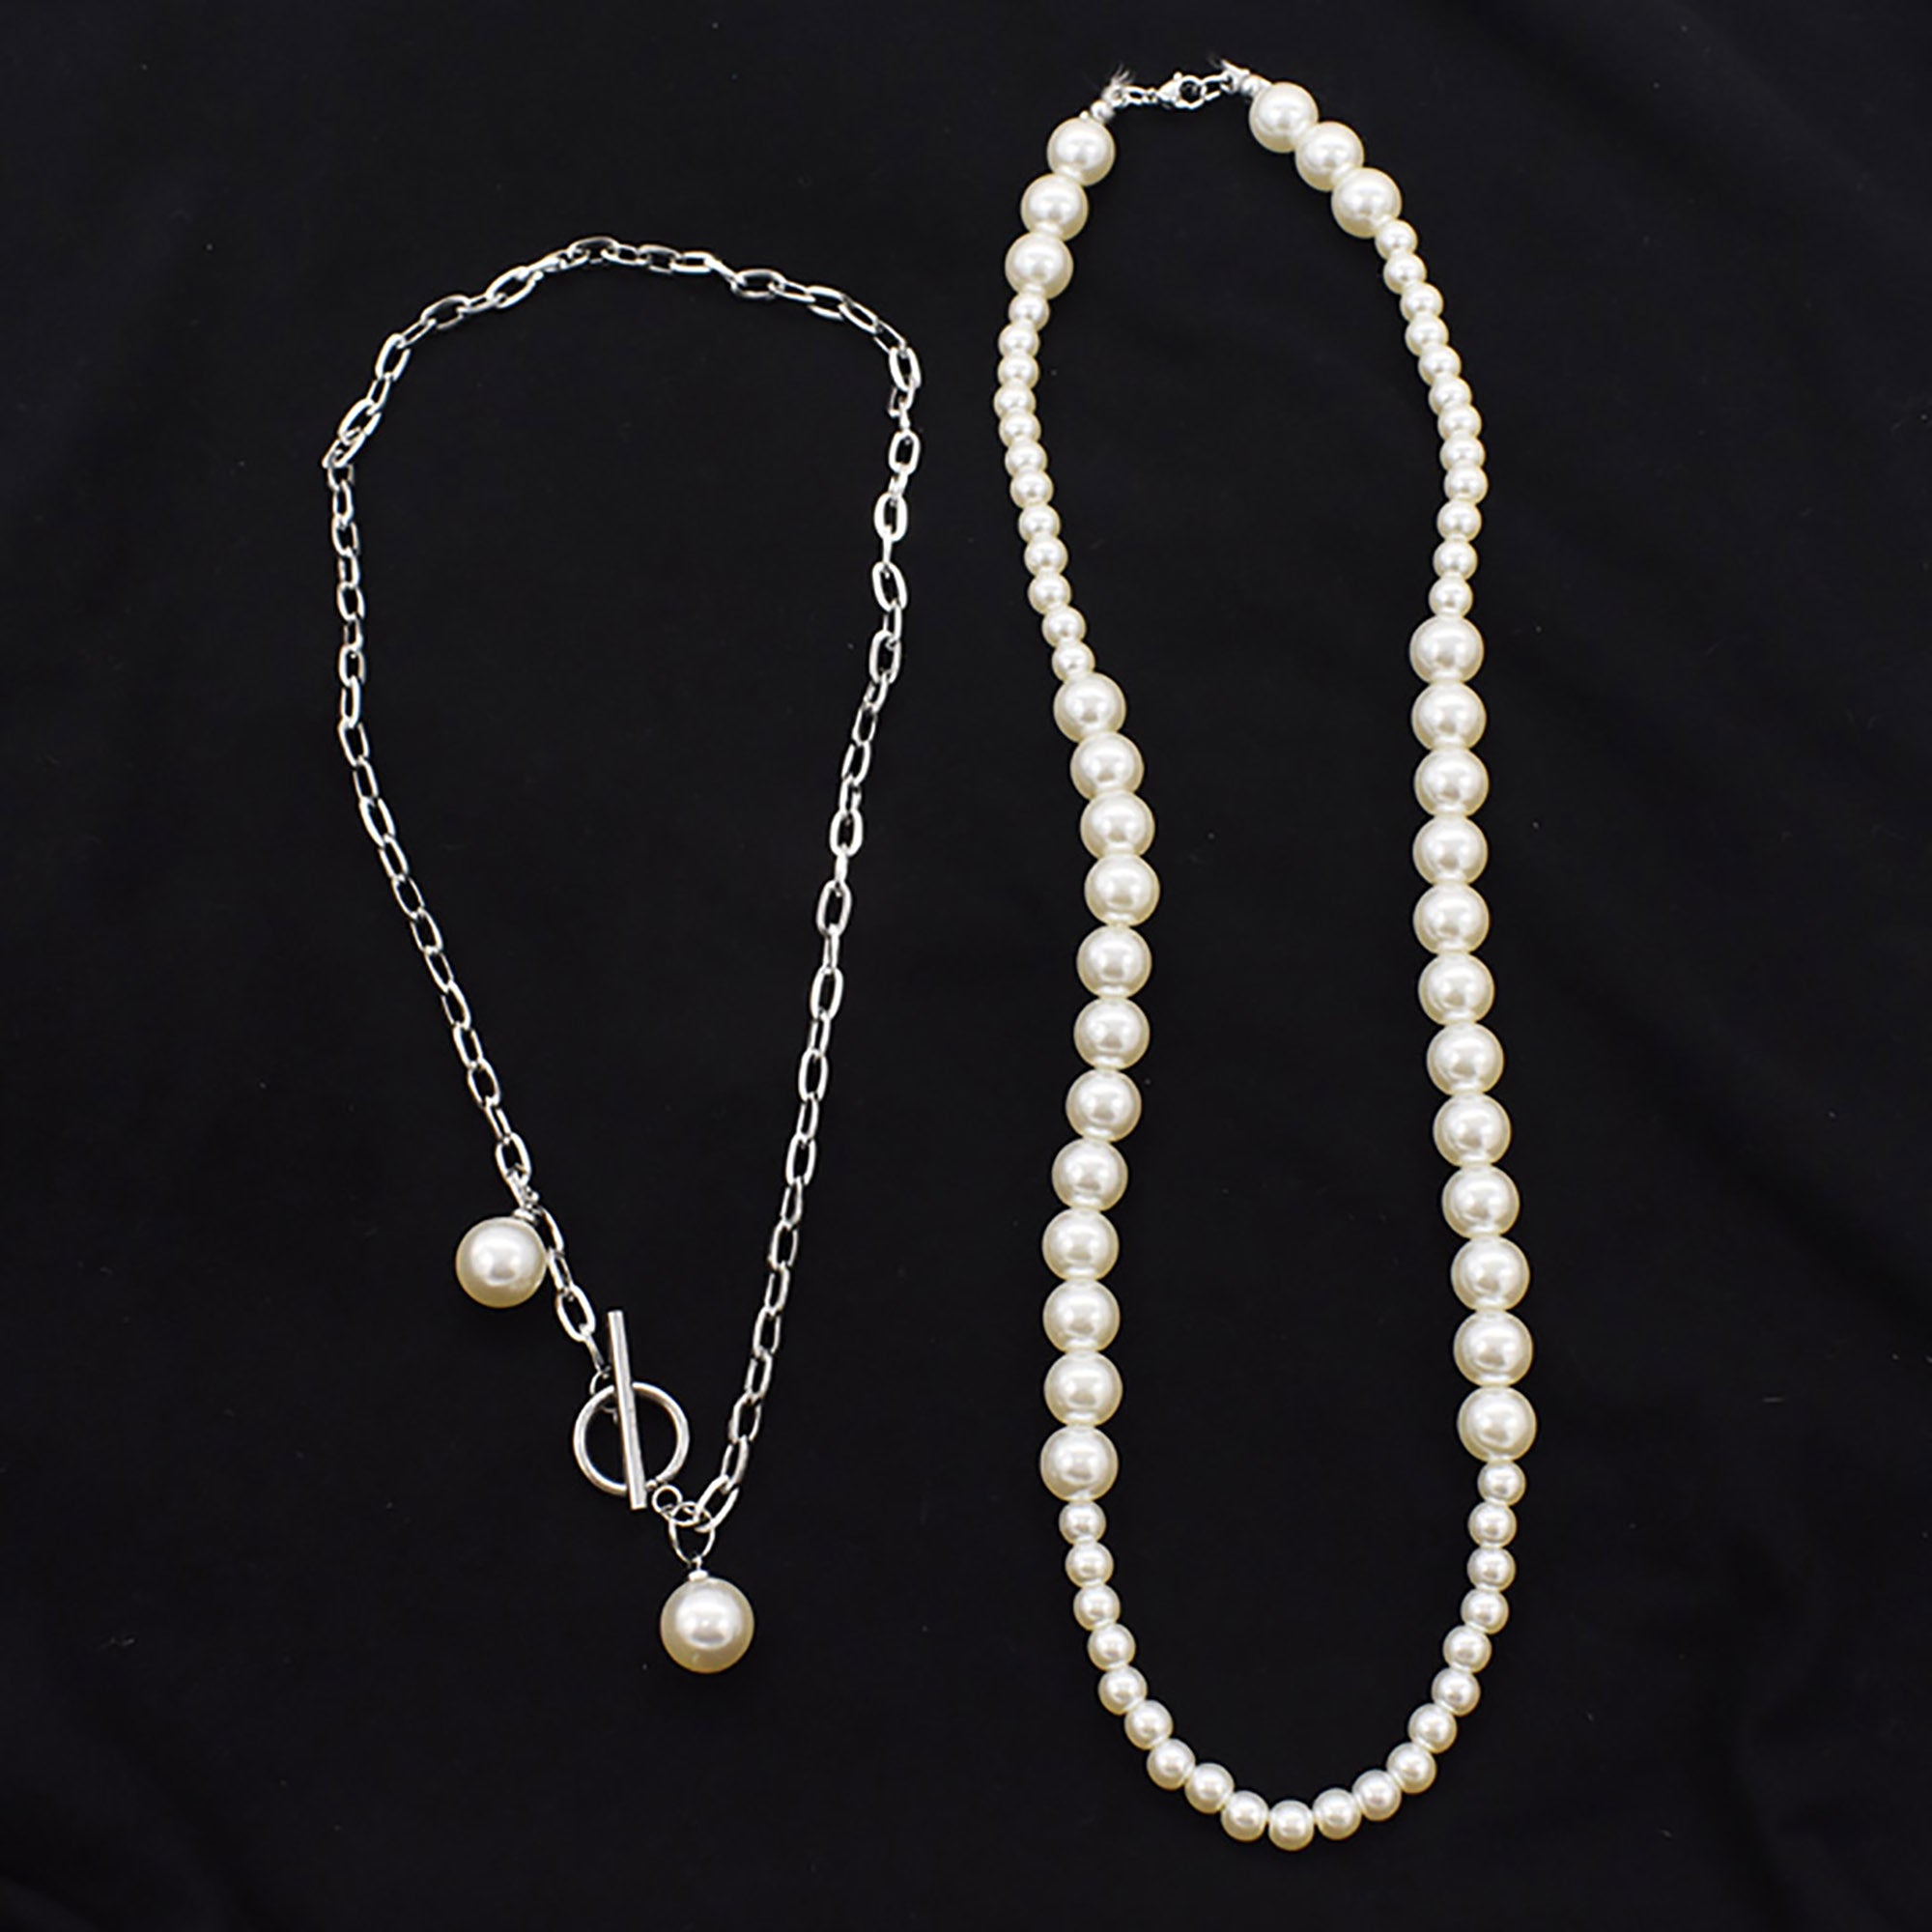 2 in 1 Set Stainless Steel  w/ Pearl Pendant Layered Necklace Valentine Day Gift KOL / Youtuber / Celebrity / Fashion Icon styling